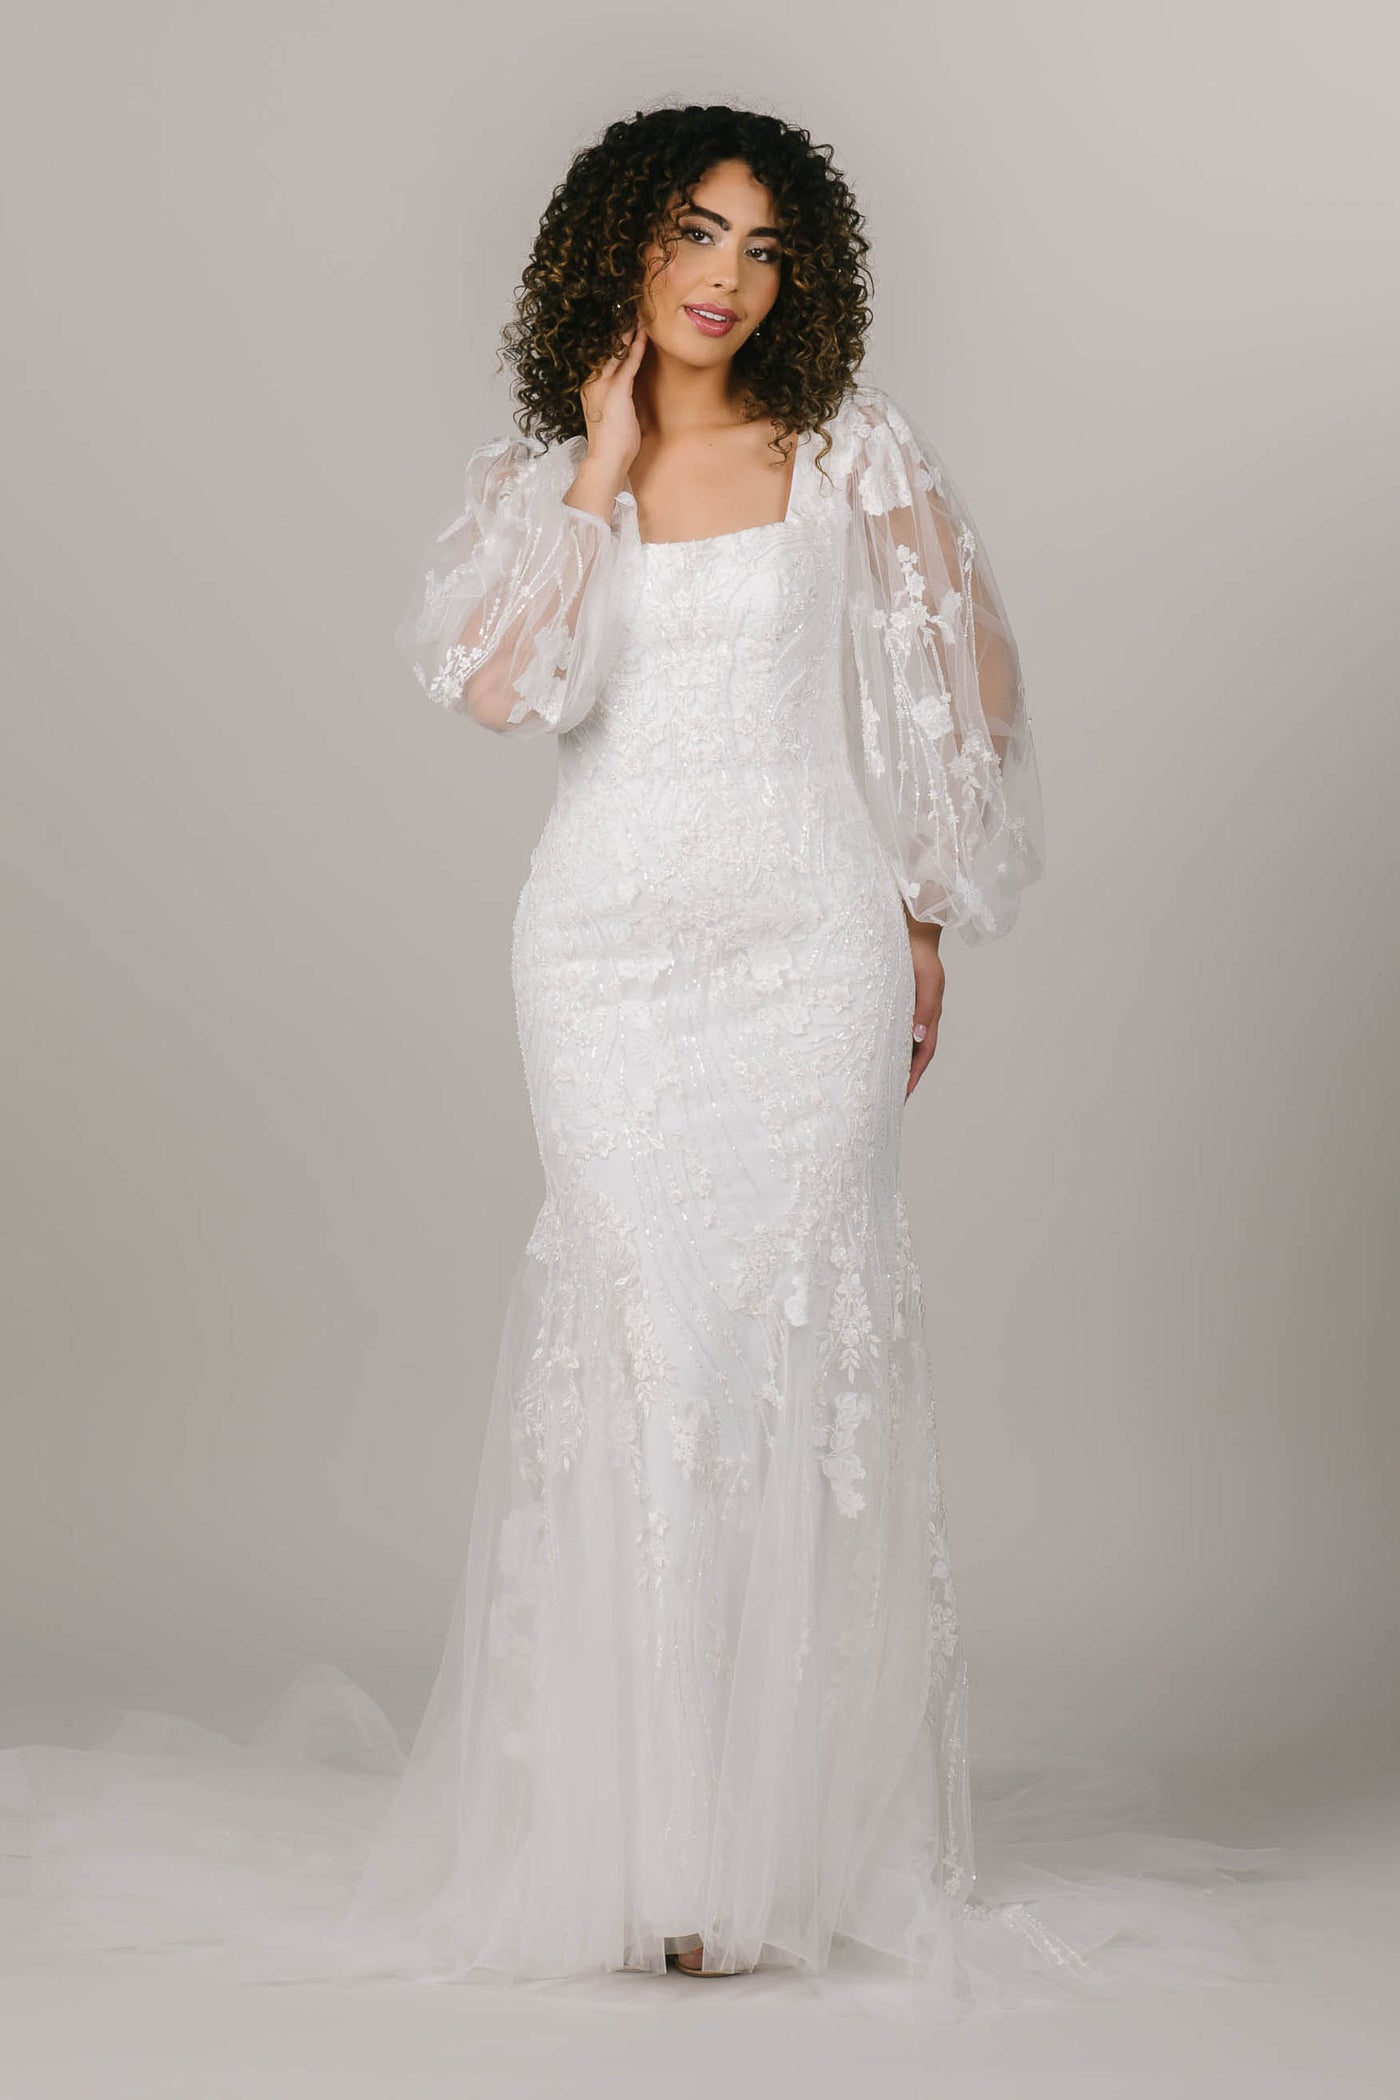 This is a front shot of a modest wedding dress with balloon lace sleeves, square neckline, and a mermaid silhouette.